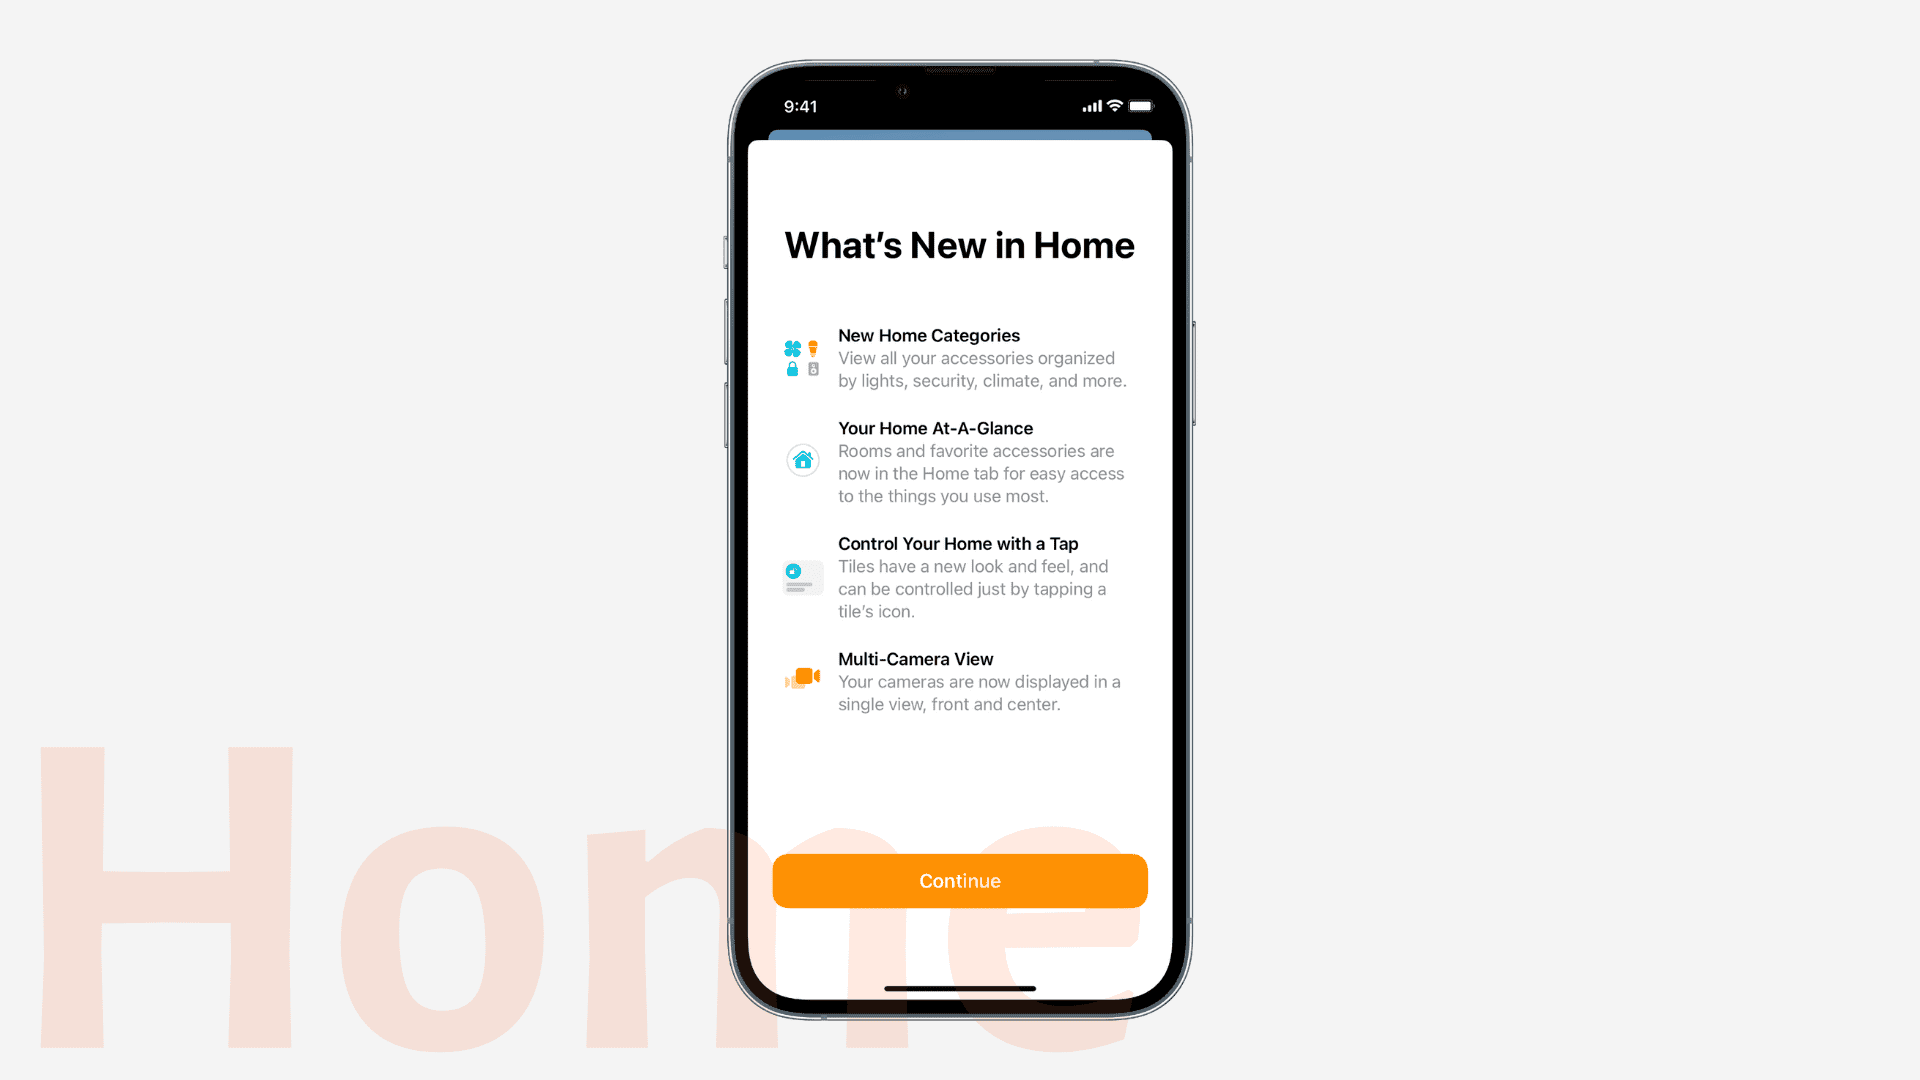 Improvements to Home in iOS 16